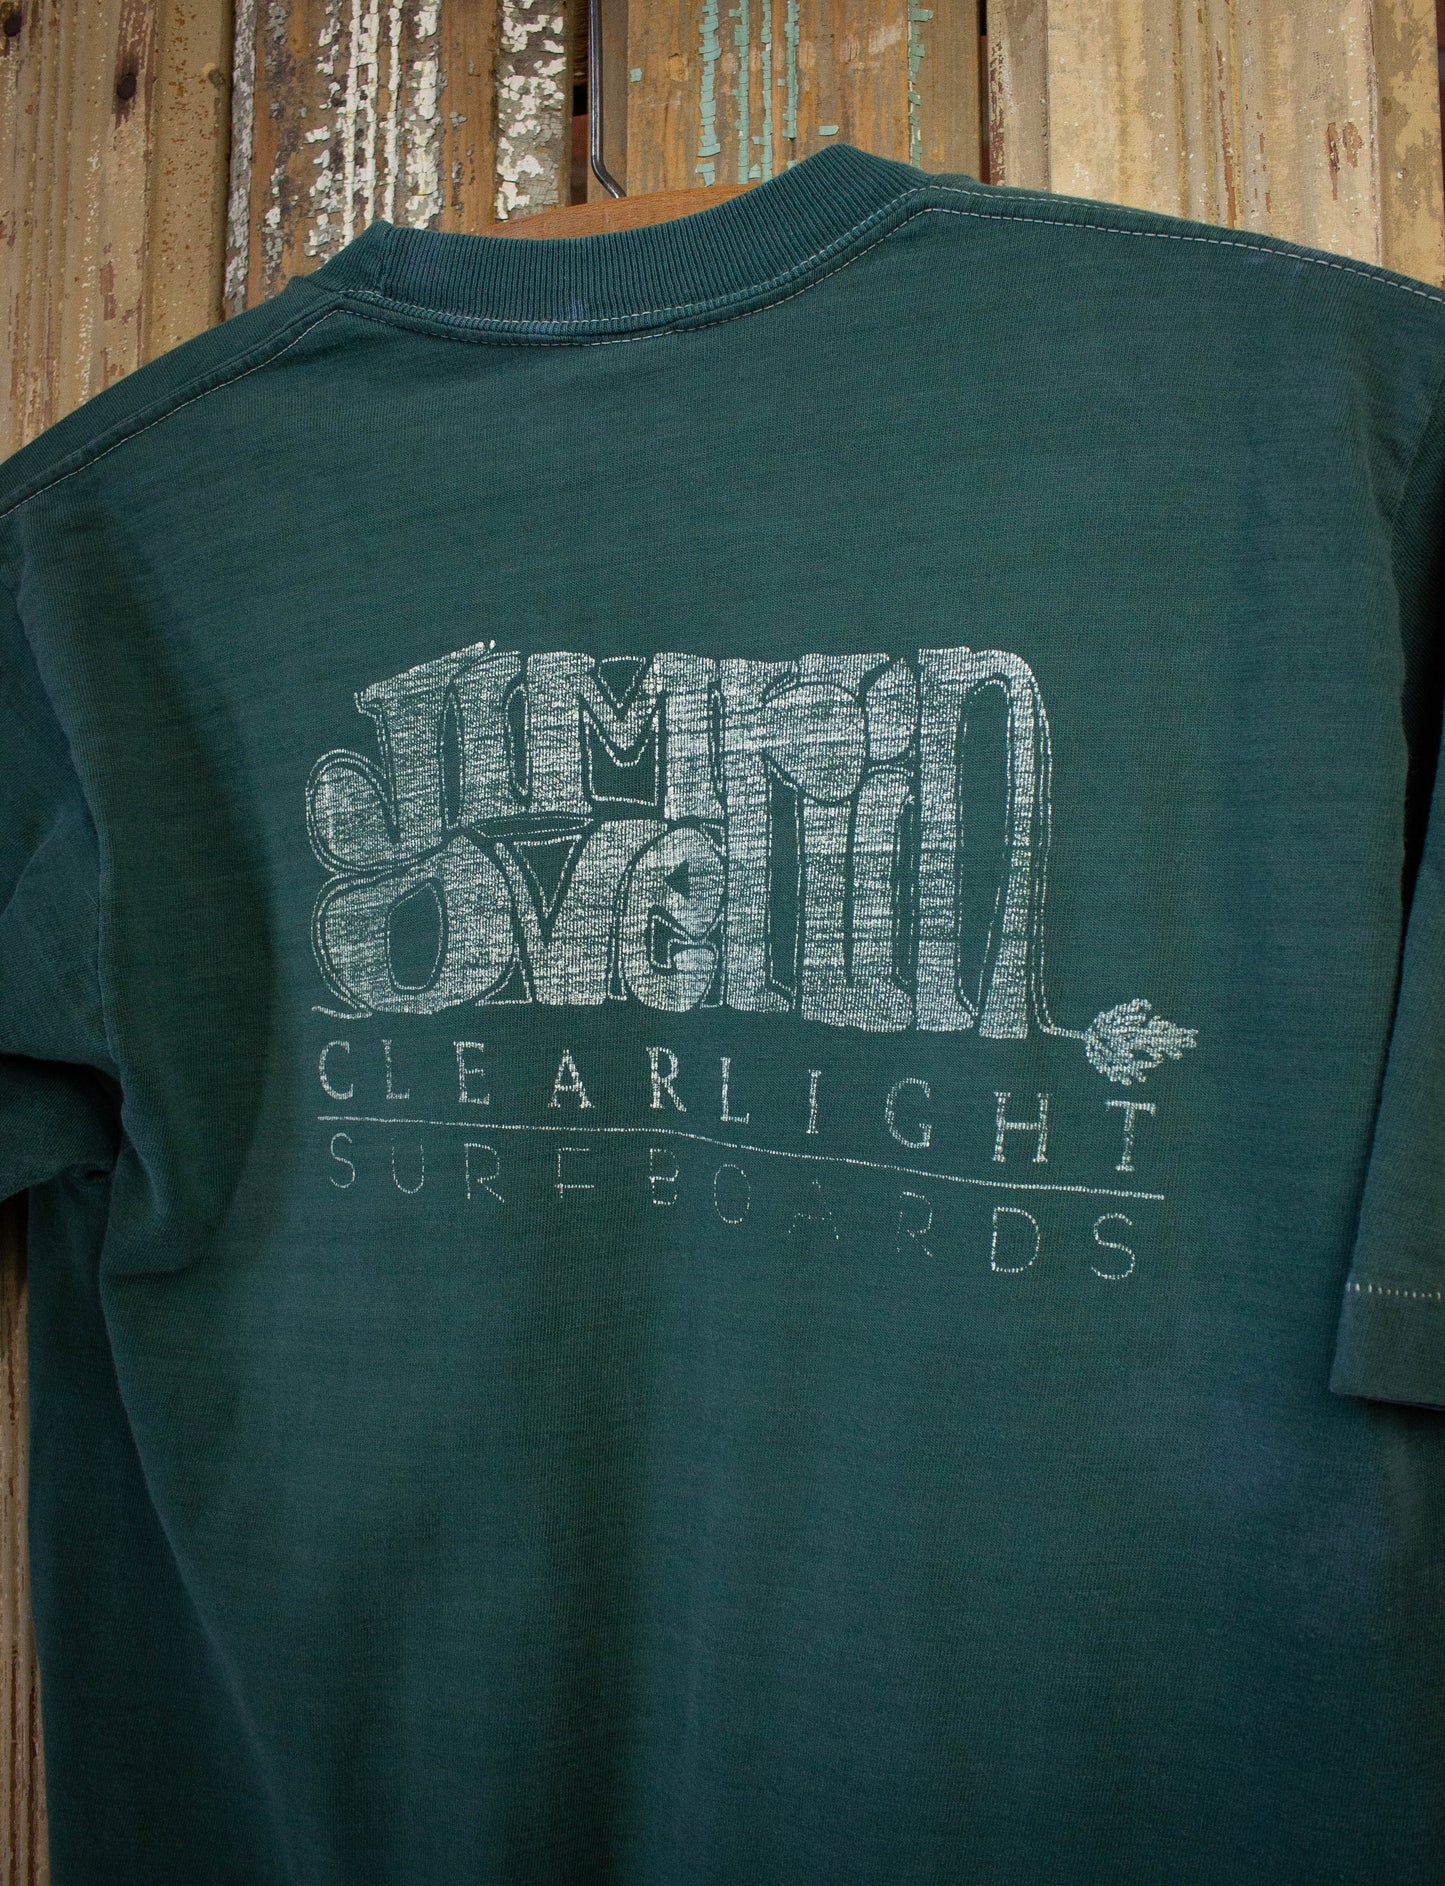 Vintage Jim Overlin Surfboards Graphic T-Shirt Green S